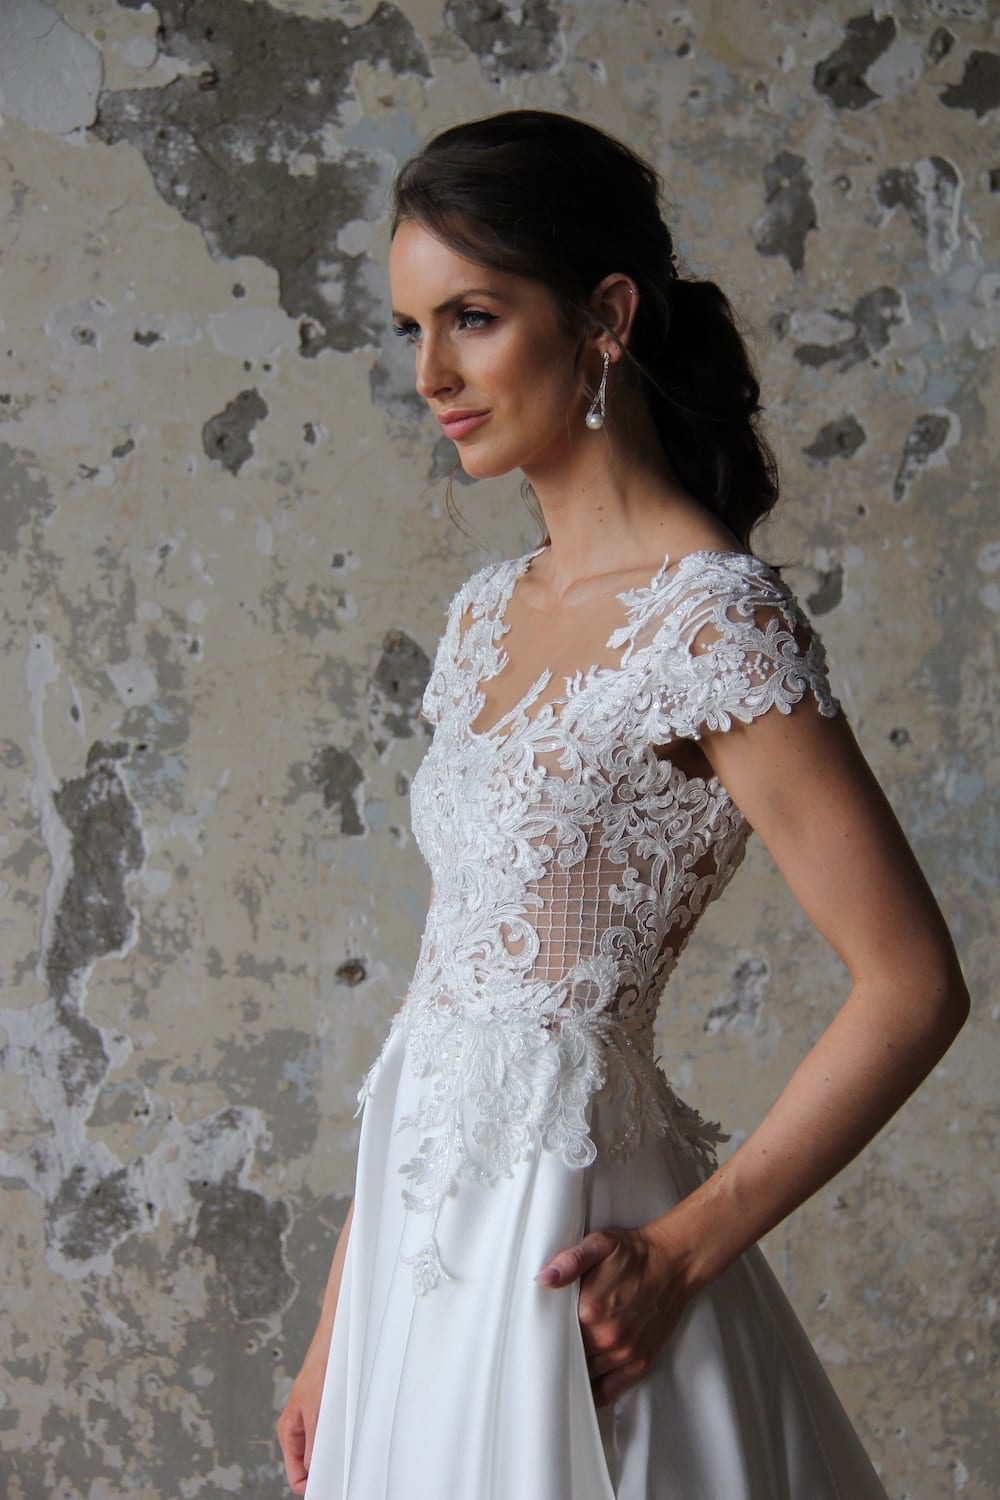 Female model wearing Vinka Design Modern Muse Wedding Dress. In chic warehouse the side detail of a gown with a sheer high neckline, low back edged with lace and a skirt with pockets.